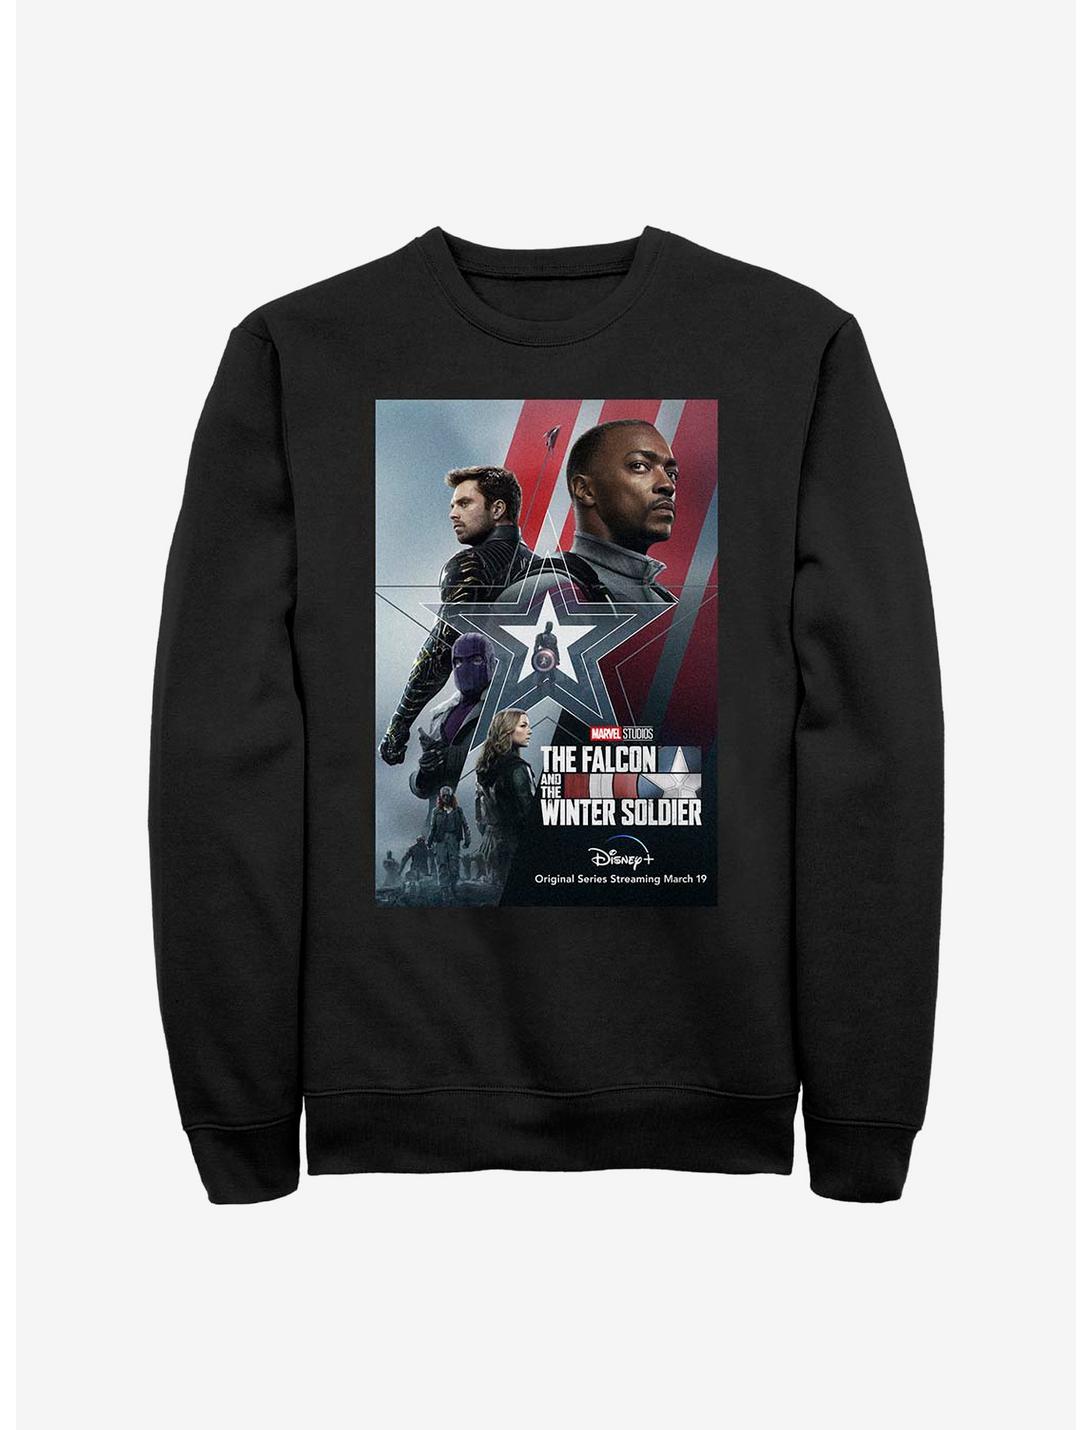 Marvel The Falcon And The Winter Soldier Poster Crew Sweatshirt, BLACK, hi-res